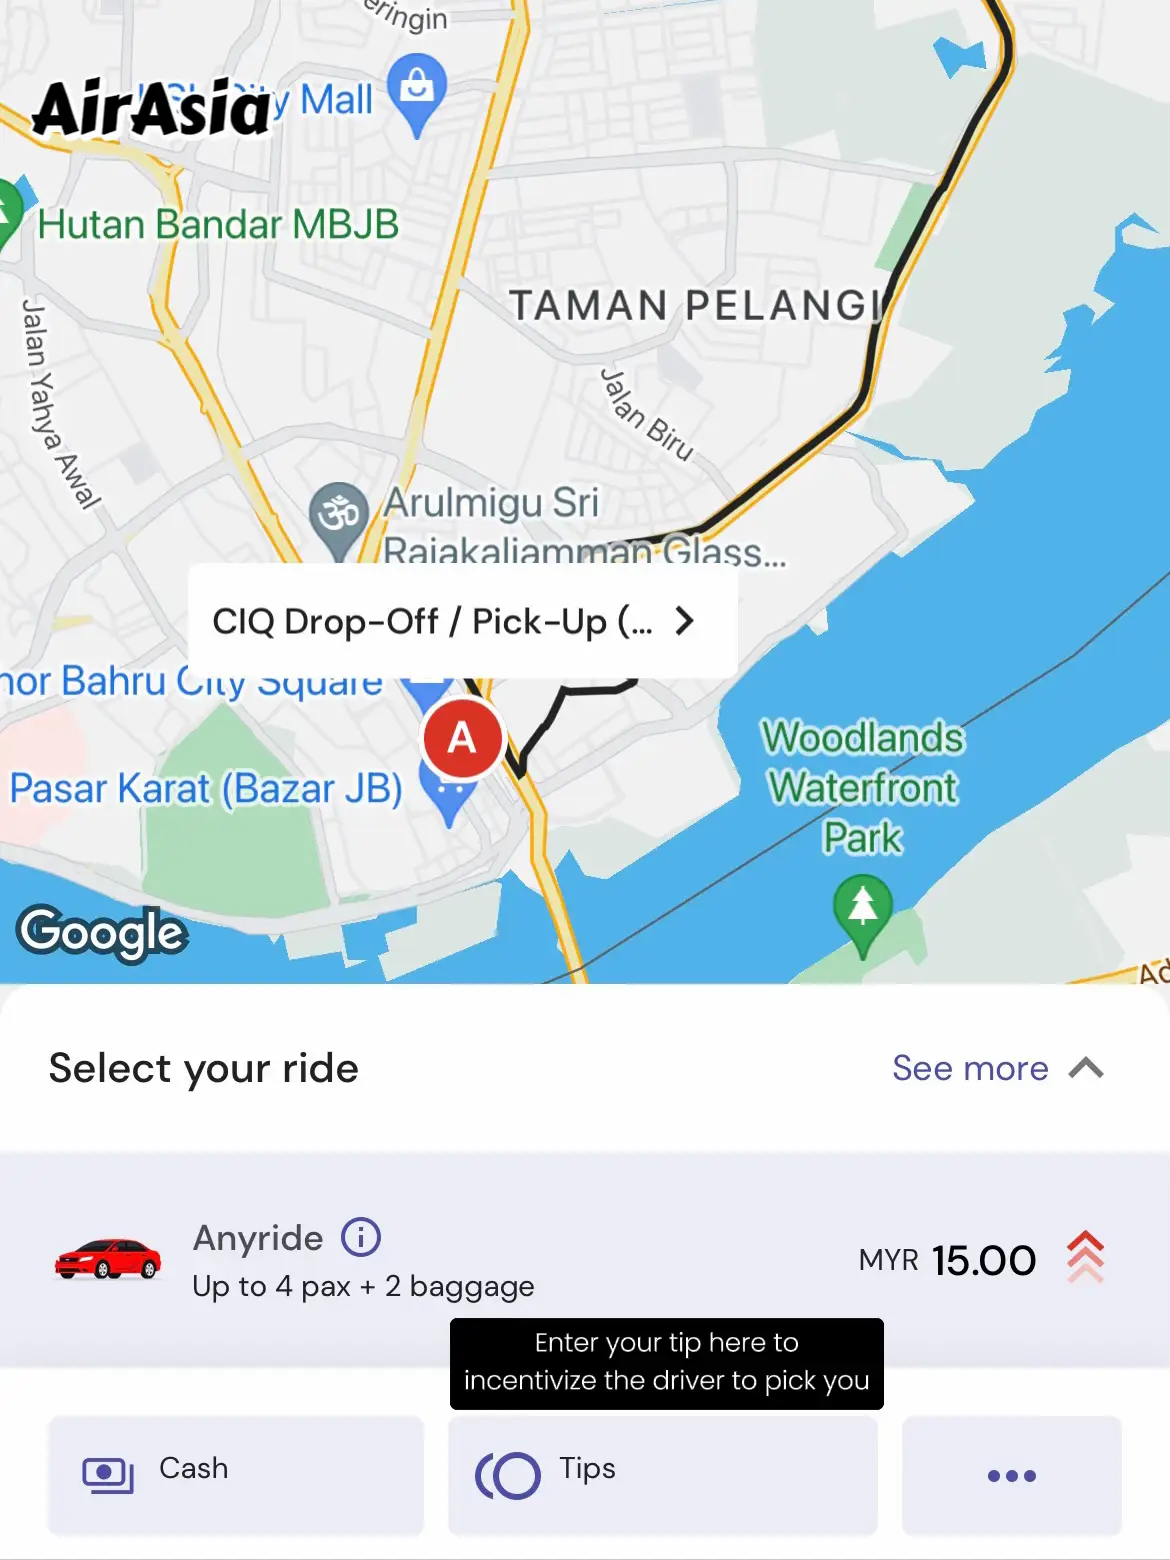 jpo1 Route: Schedules, Stops & Maps - Jpo1 Jb Sentral - Johor Premium  Outlets (Updated)